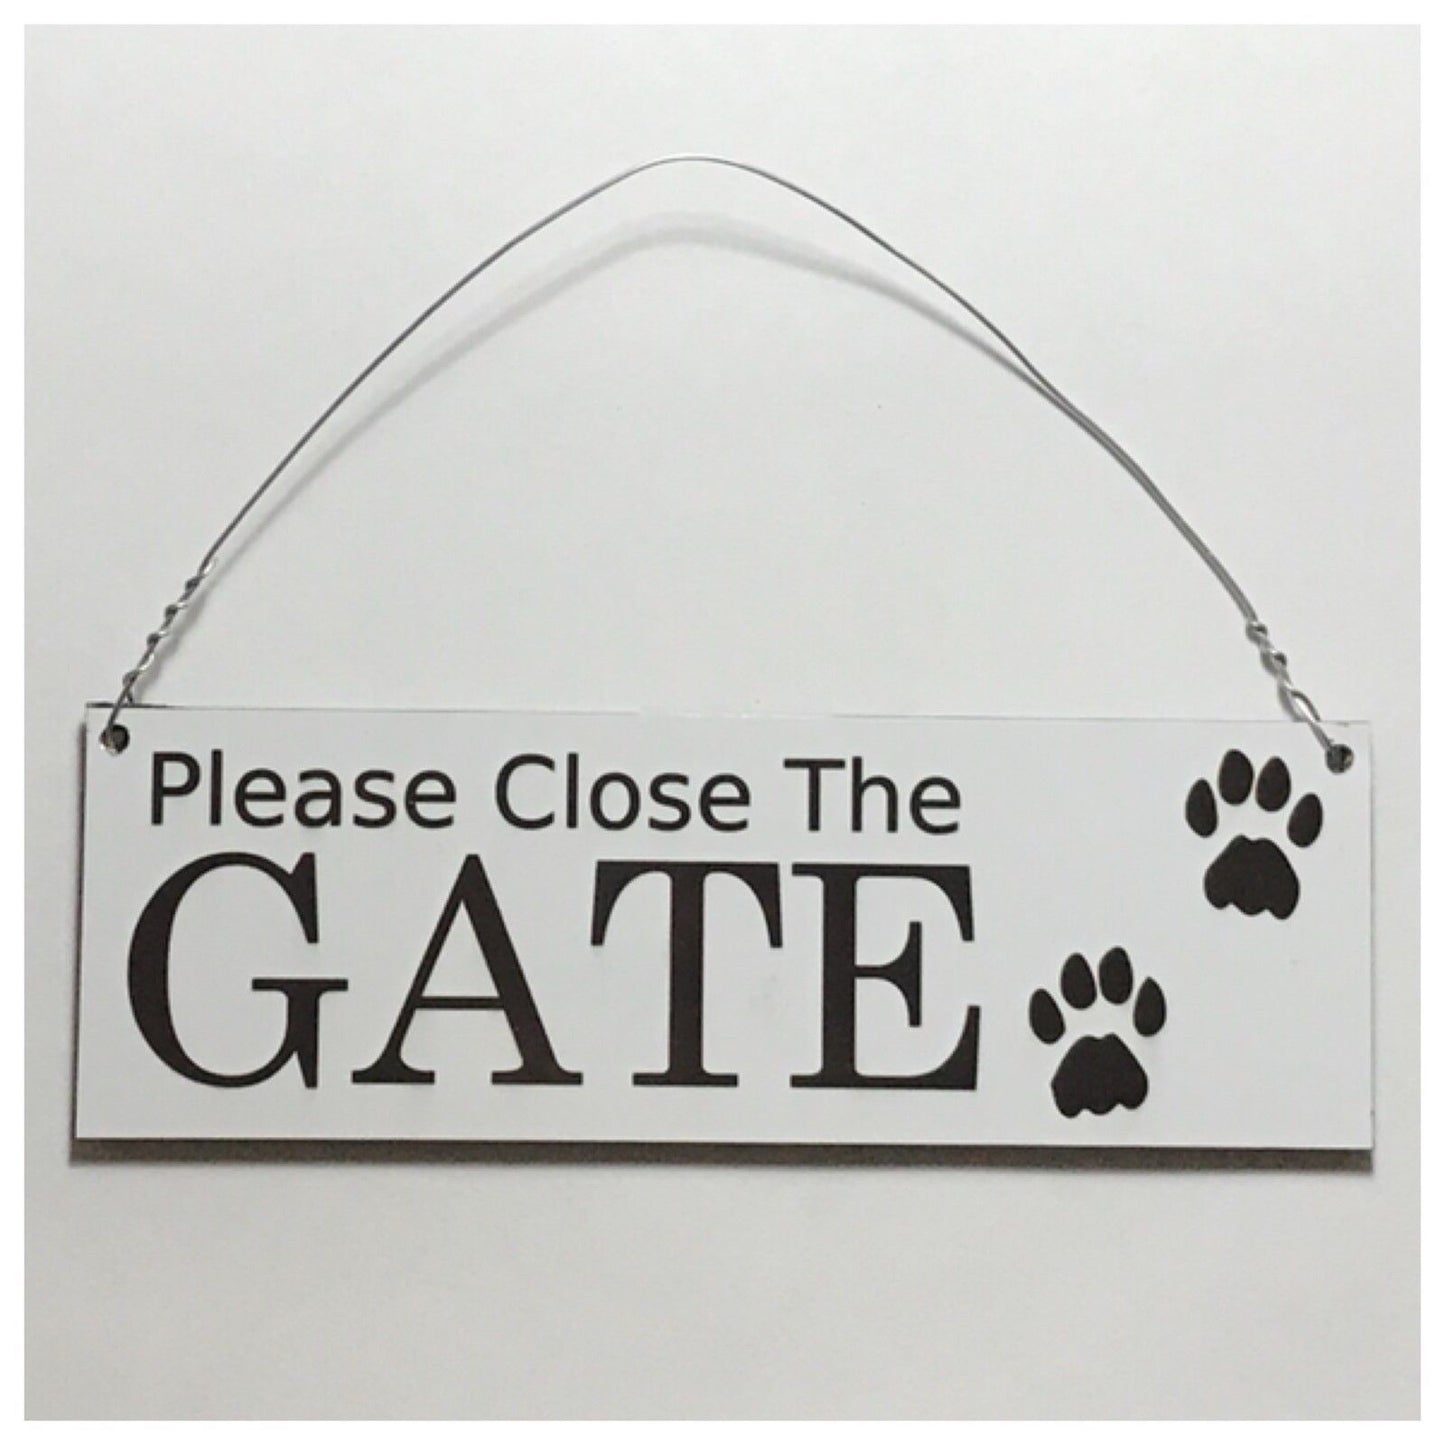 Keep The Gate Closed Dog White Sign - The Renmy Store Homewares & Gifts 